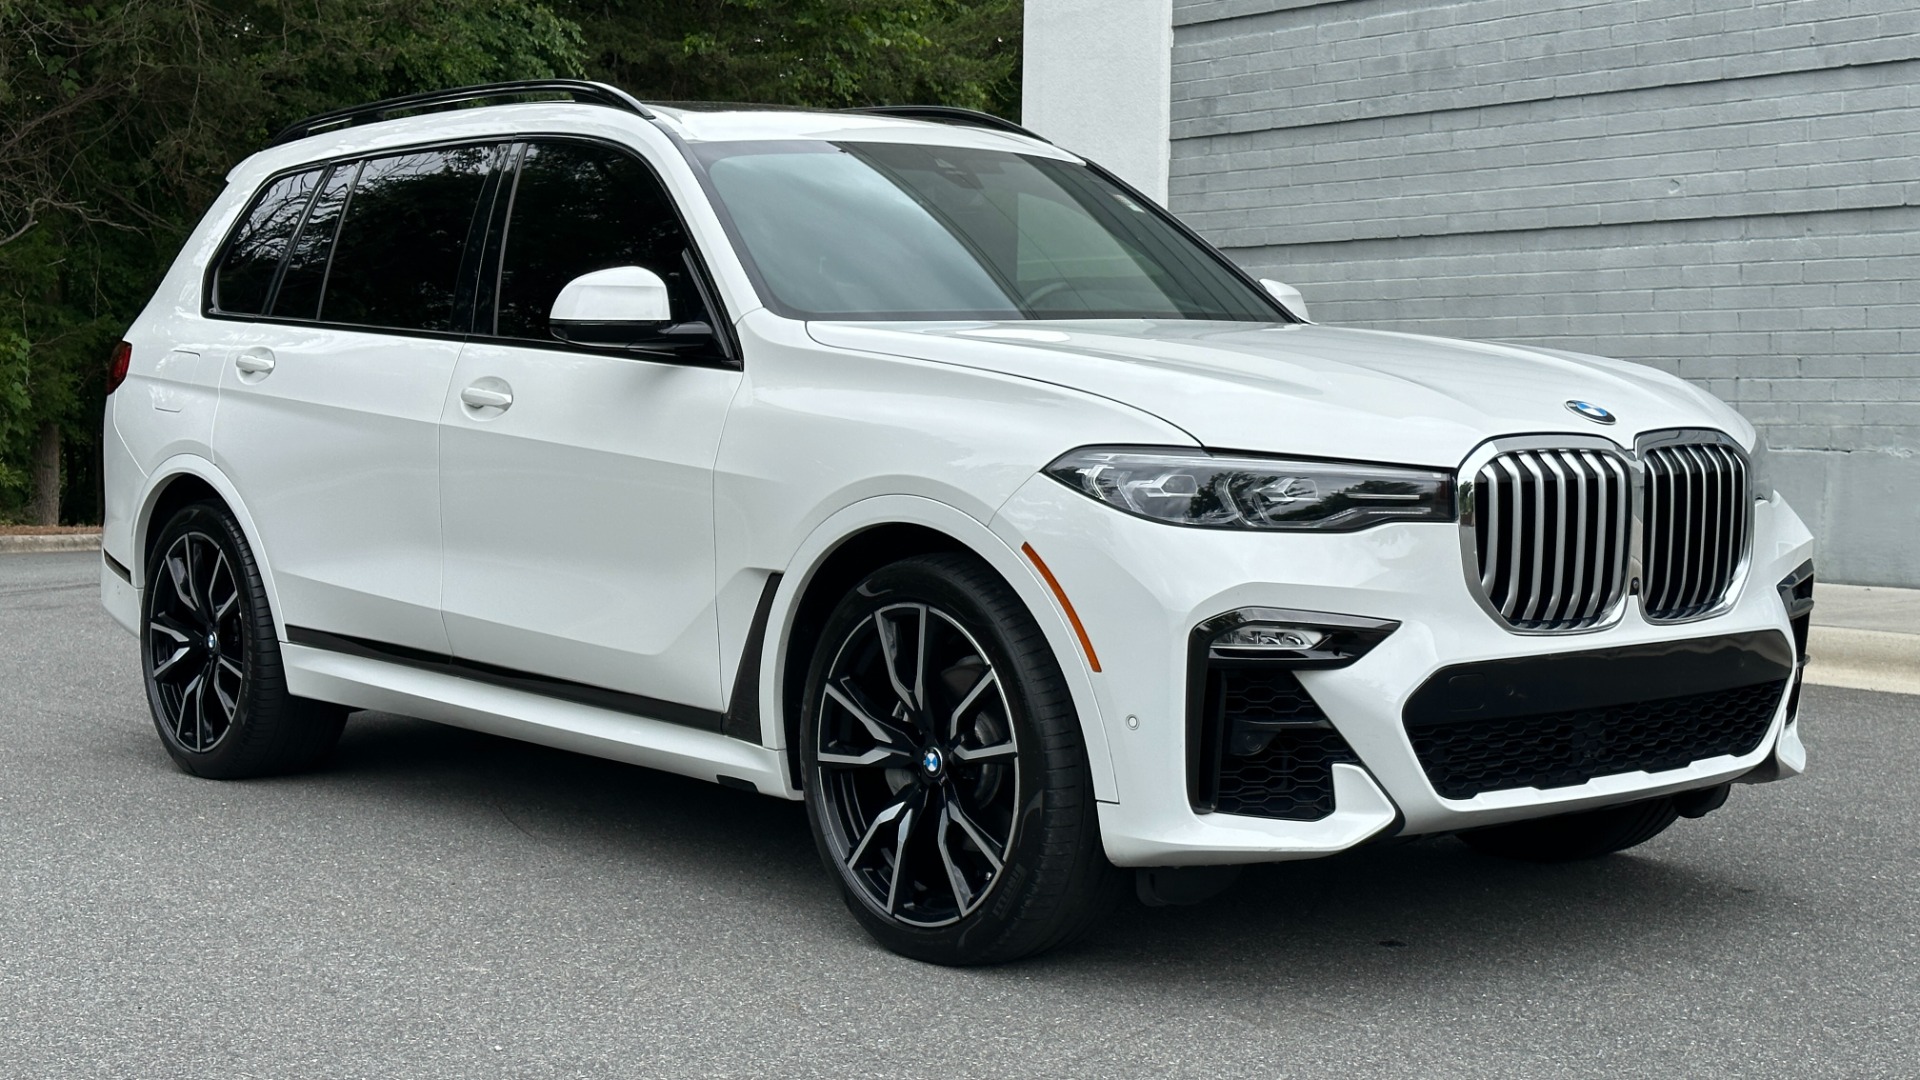 Used 2020 BMW X7 xDrive40i / 22IN WHEELS / CAPTAIN CHAIRS / M SPORT / PREMIUM PKG for sale $59,995 at Formula Imports in Charlotte NC 28227 2